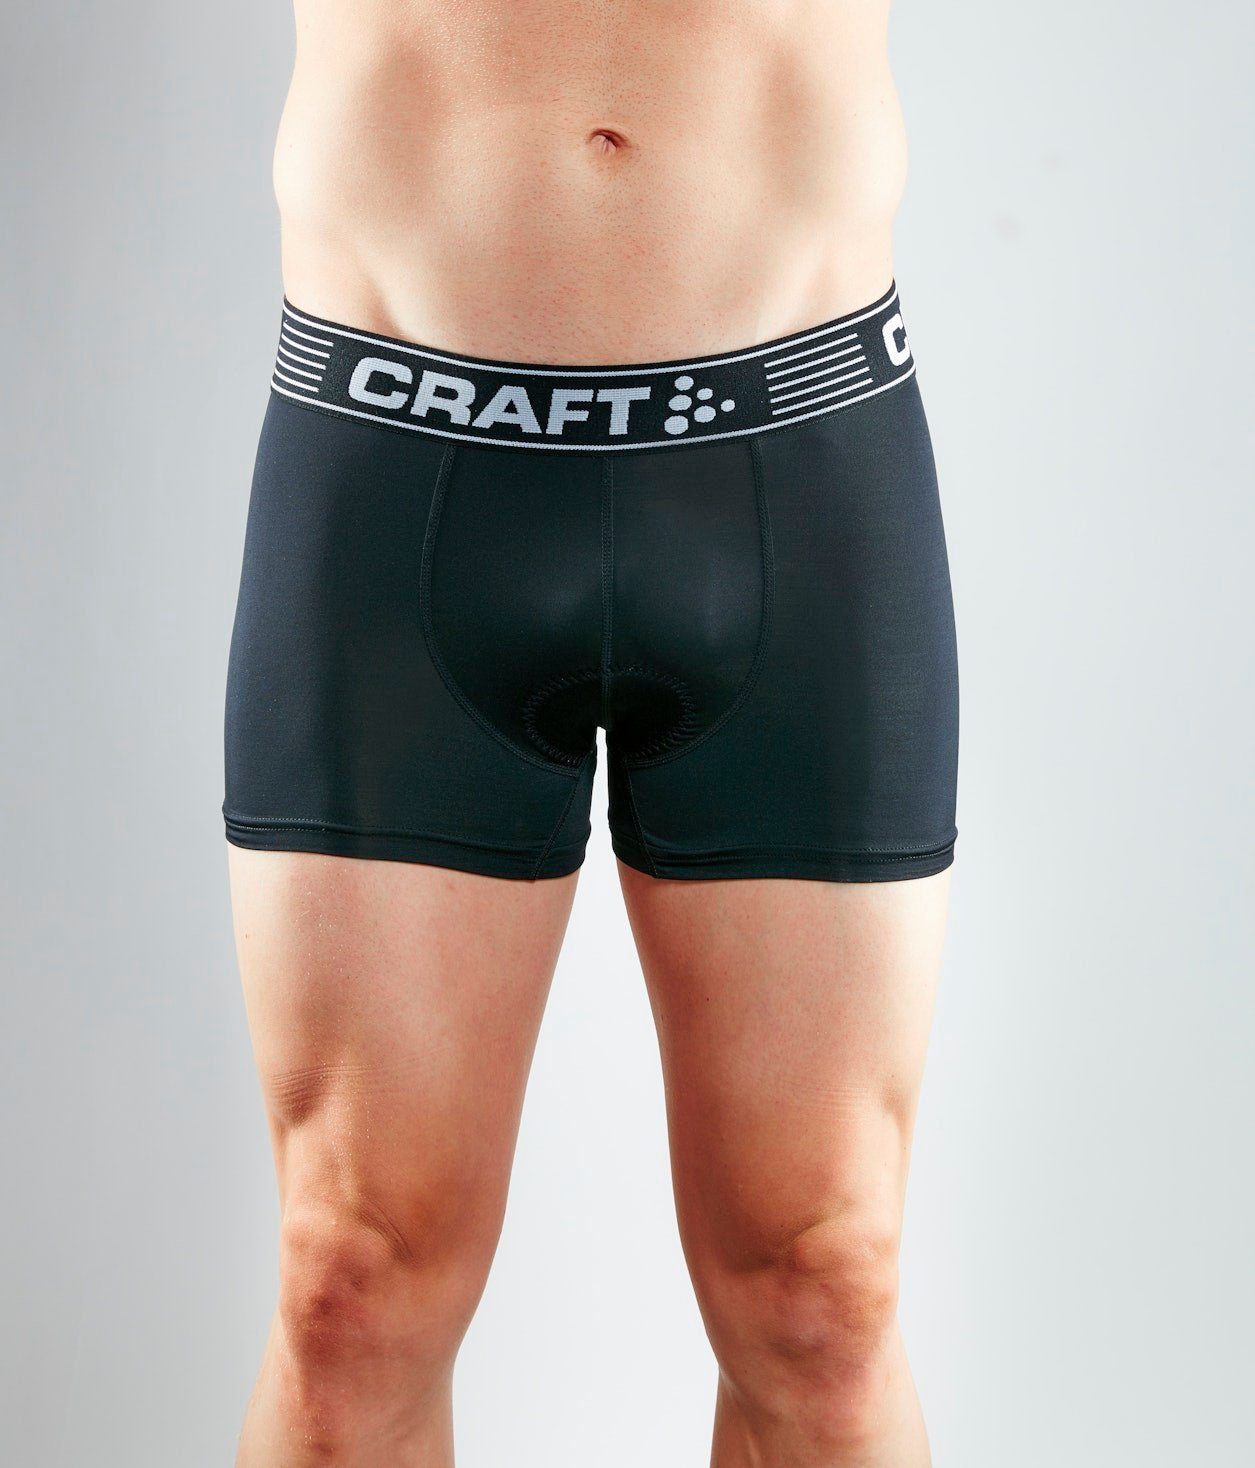 Bike Core BLACK/WHITE Craft Greatness Funktionsboxer Boxer M